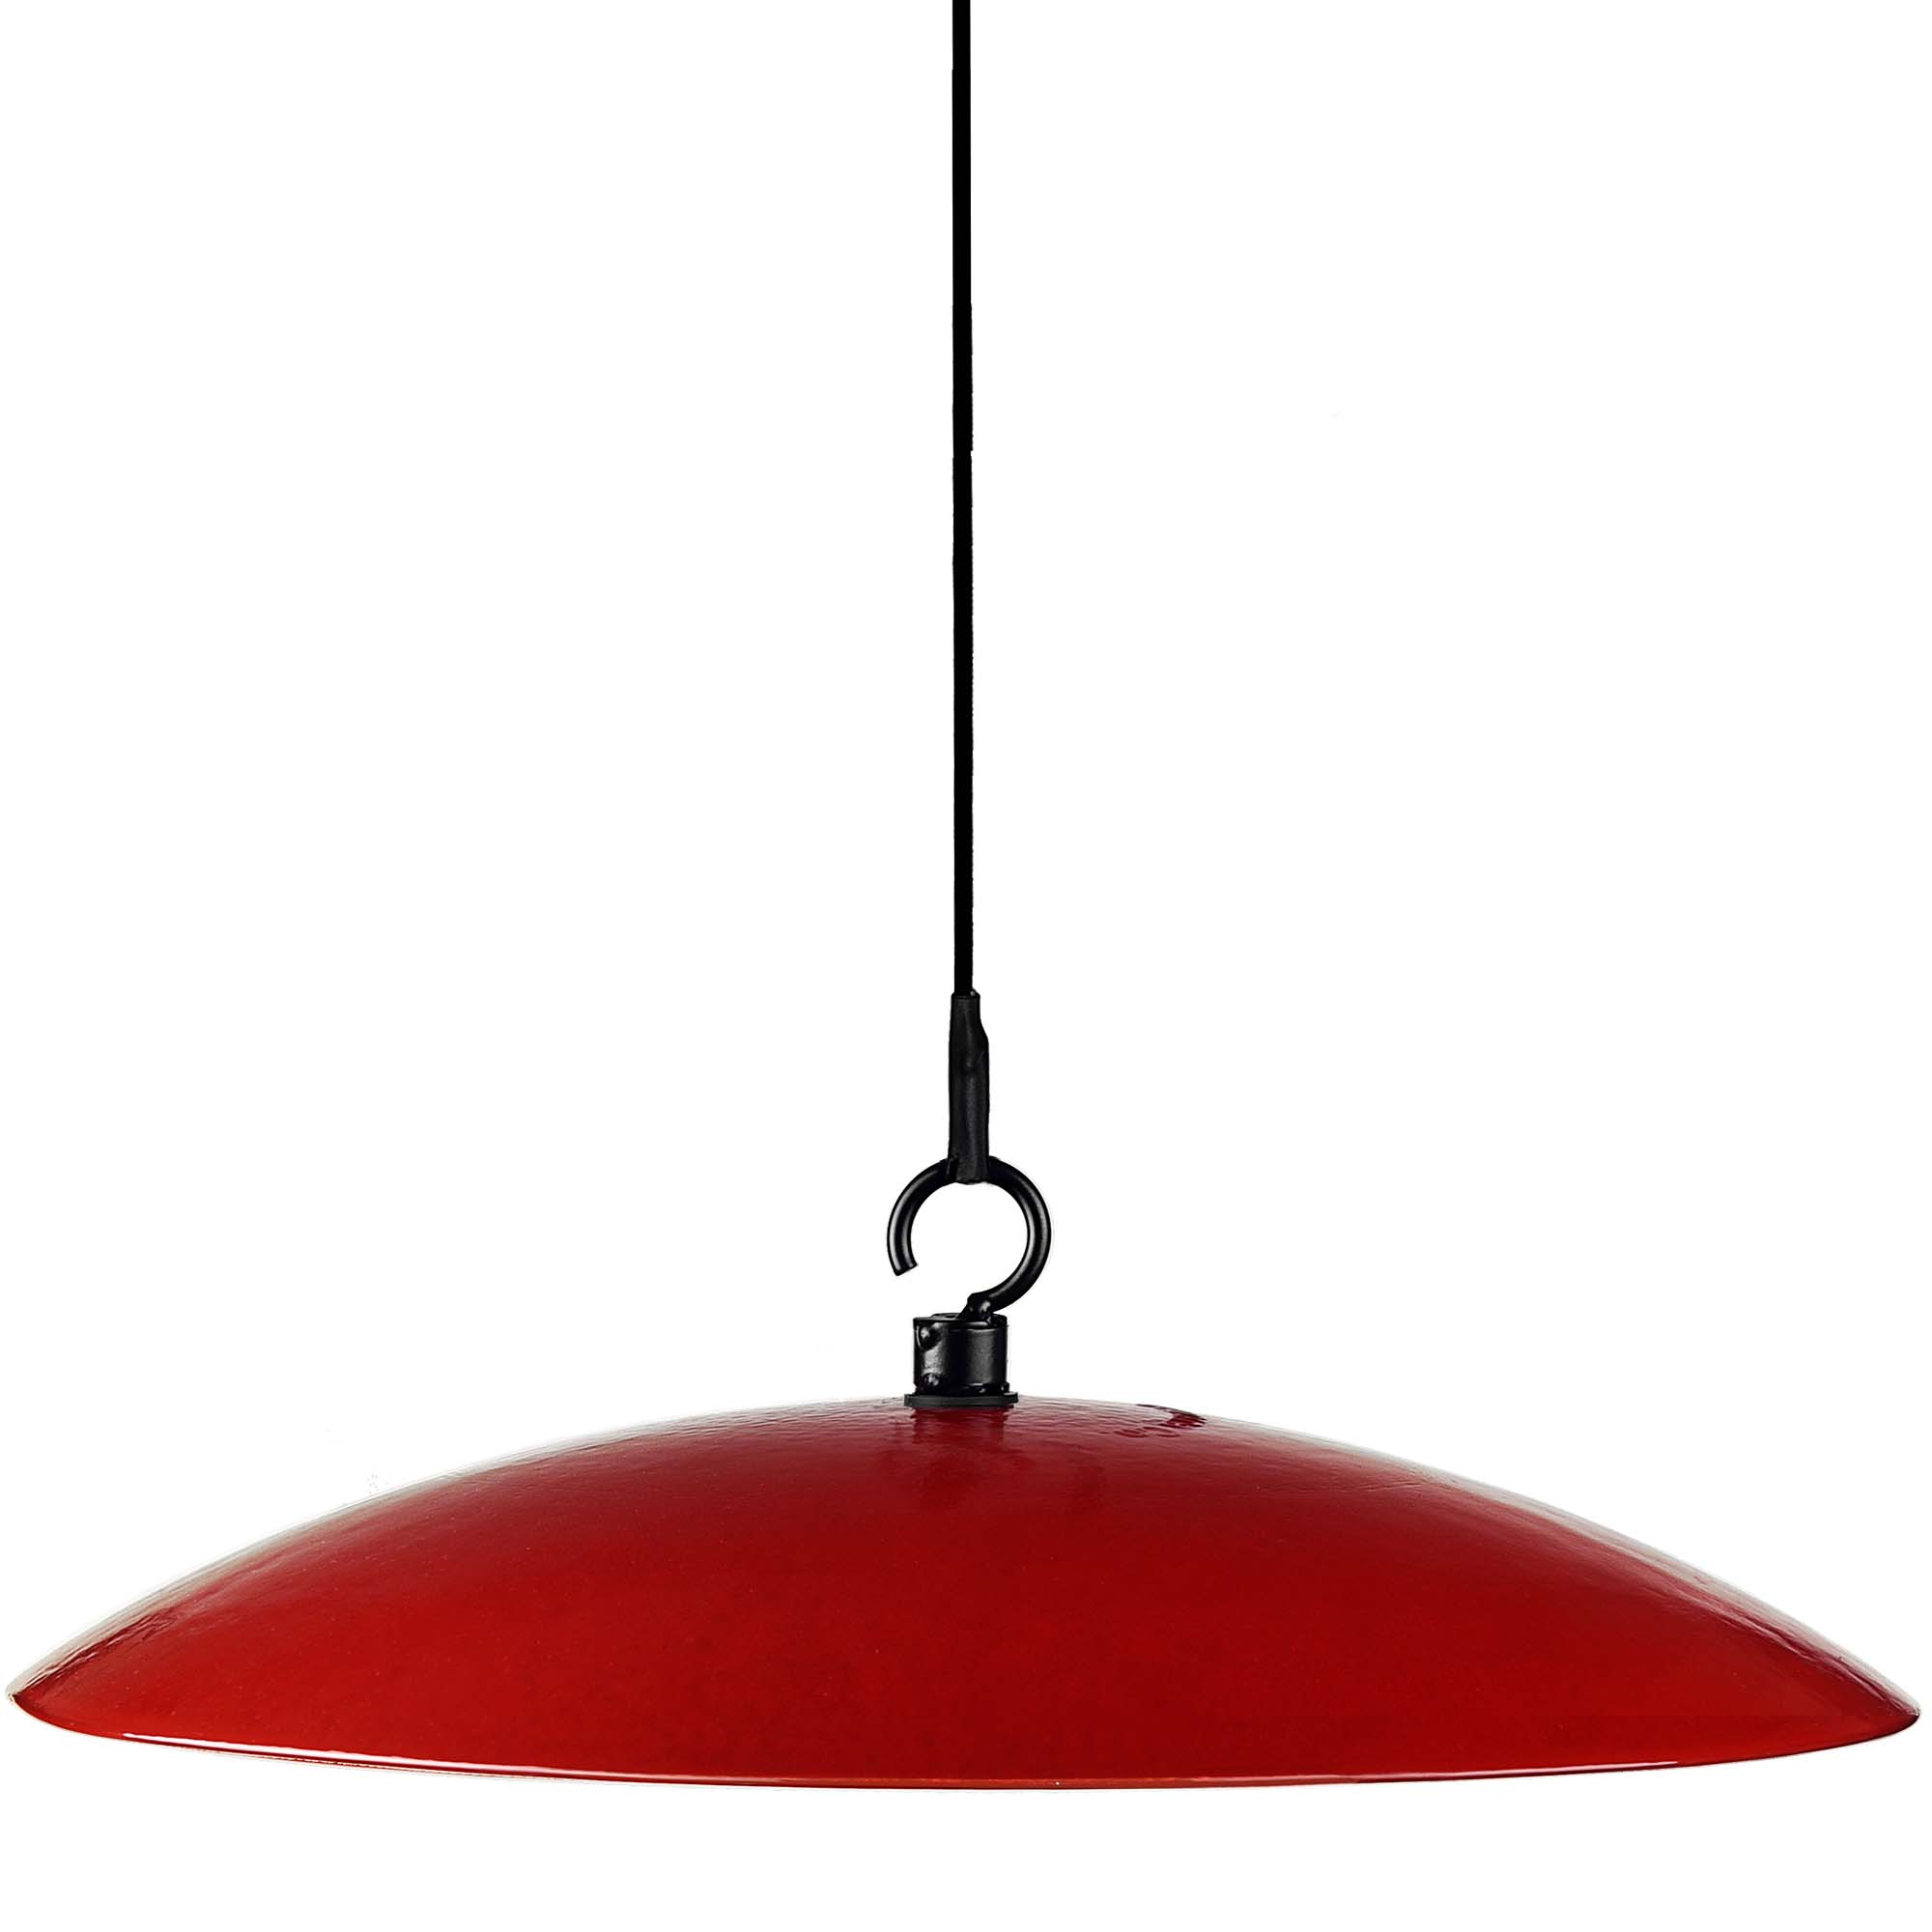 Mosaic Birds Glass Baffle Dome Ruby Red